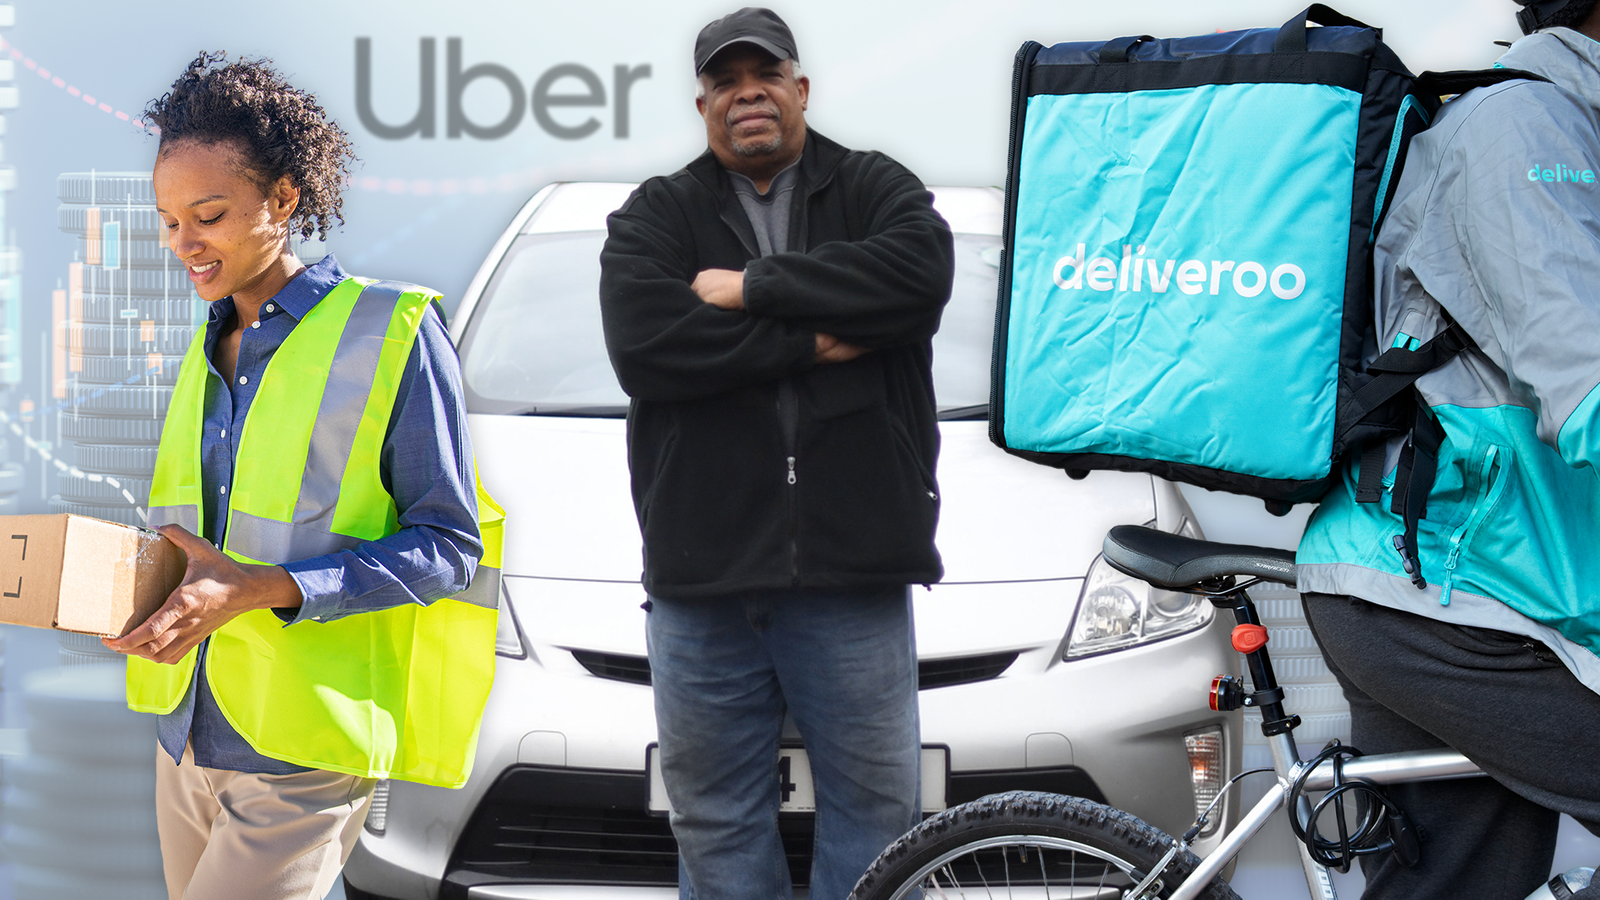 What is the gig economy and how will it be affected by Uber's announcement?